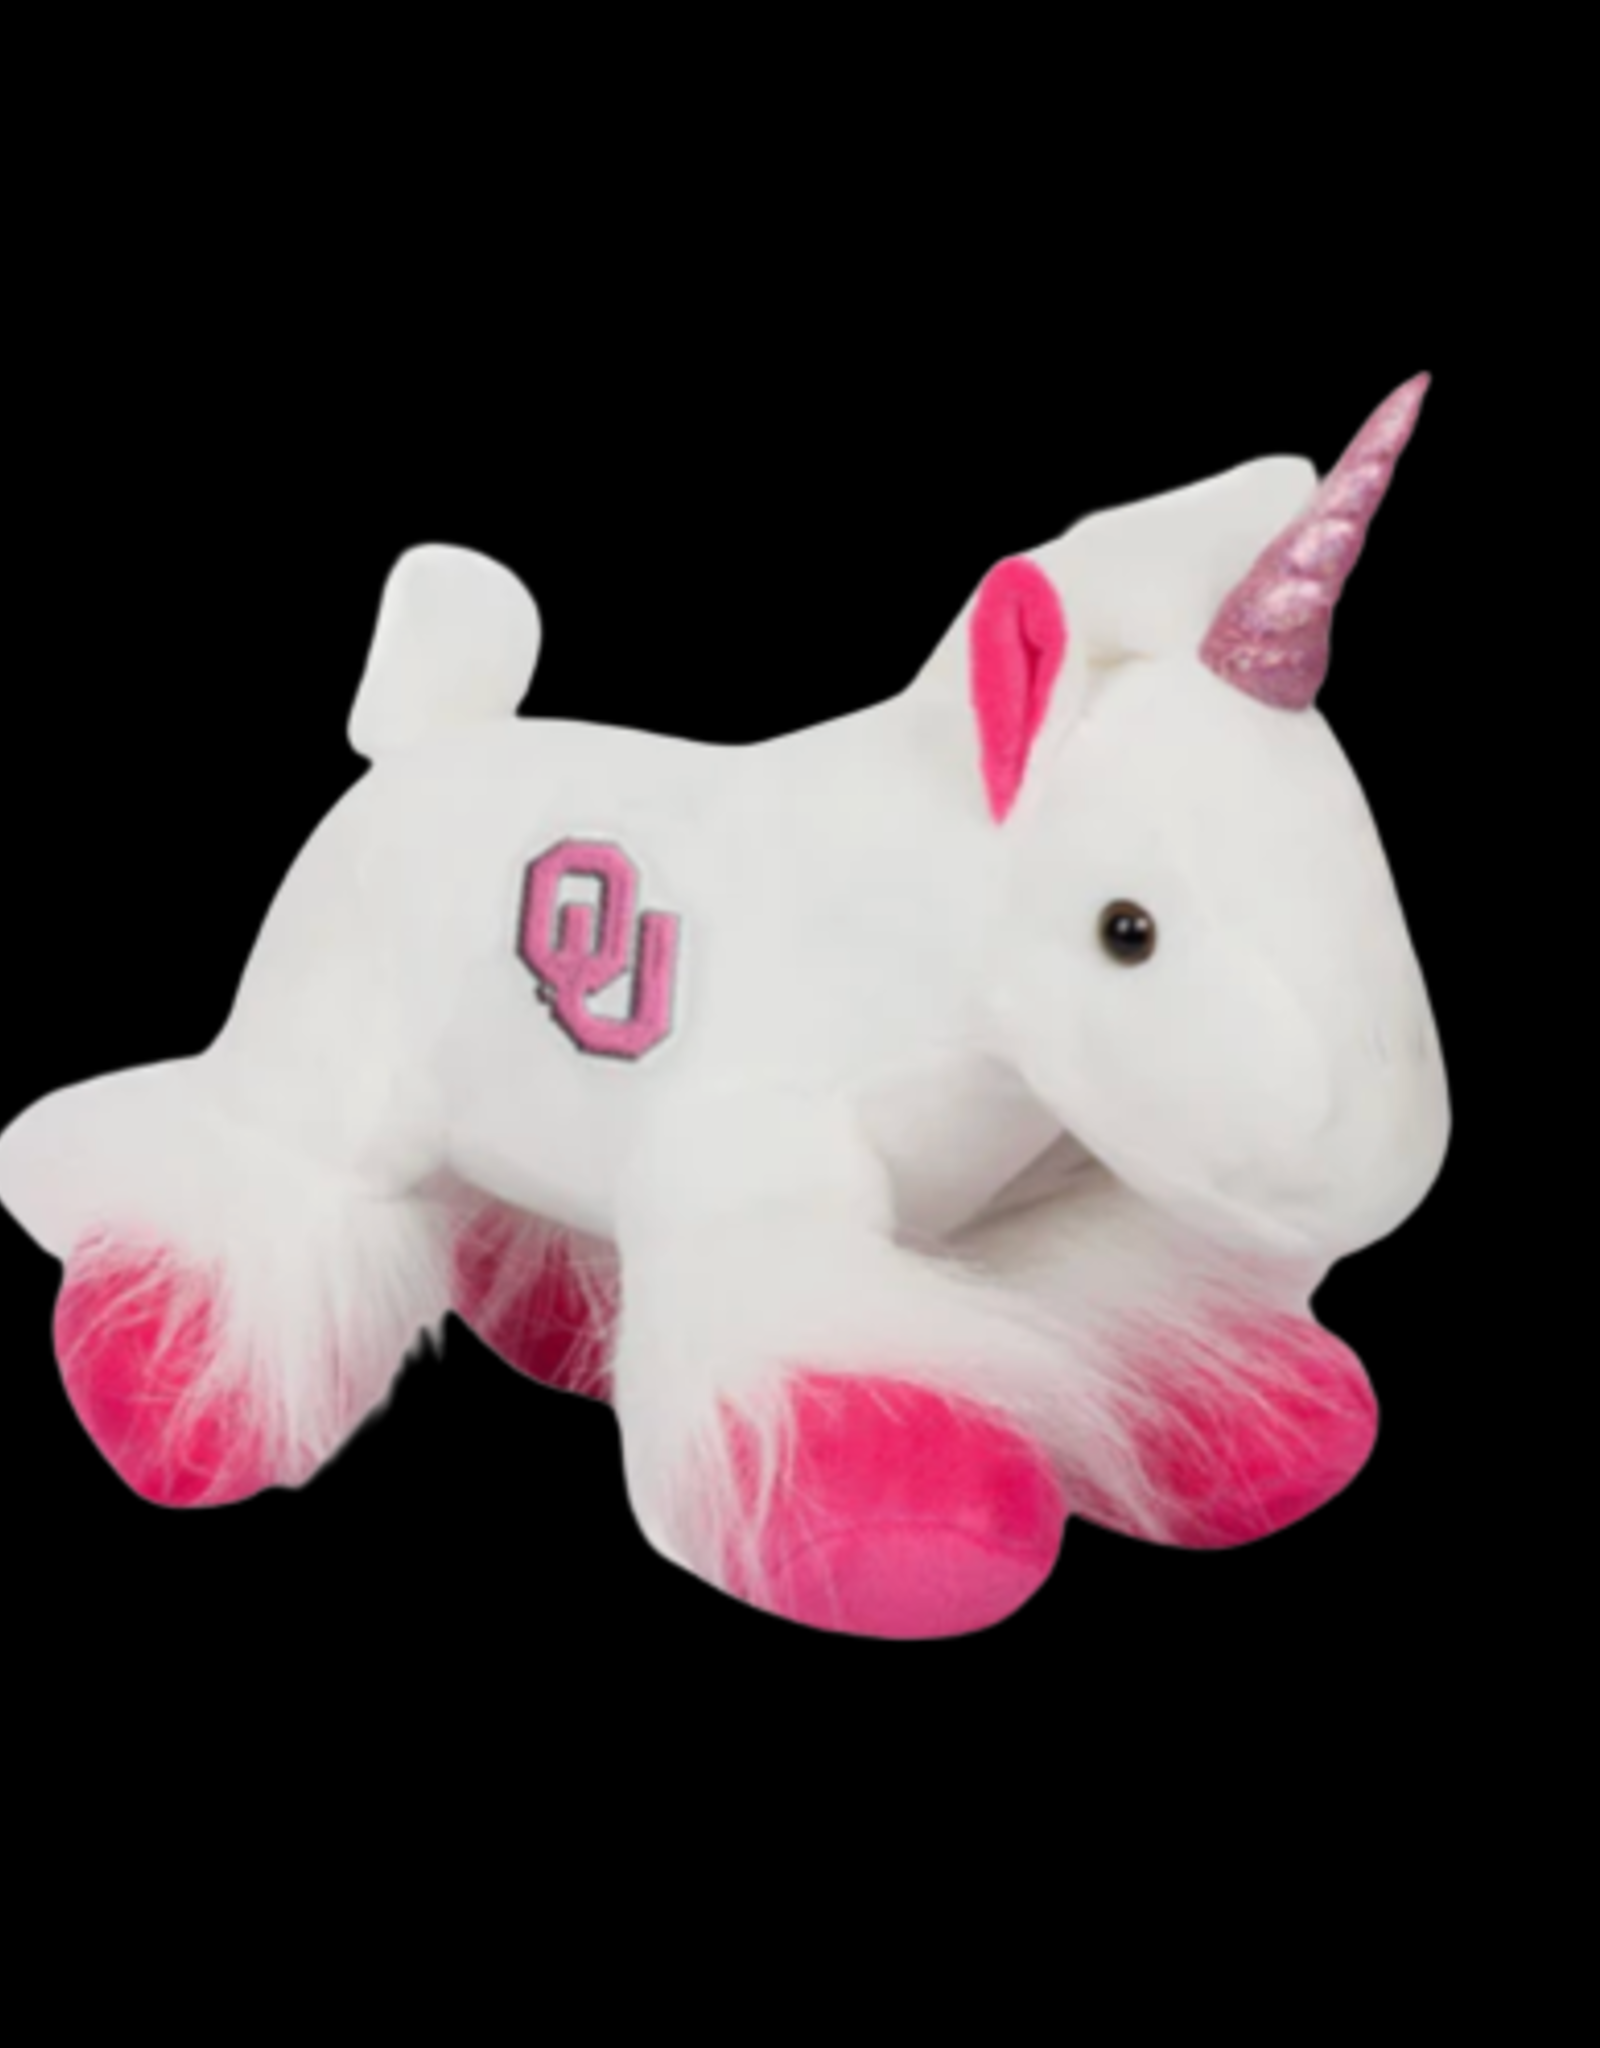 Forever Collectibles OU Unicorn Stuffed Animal (approx. 15")